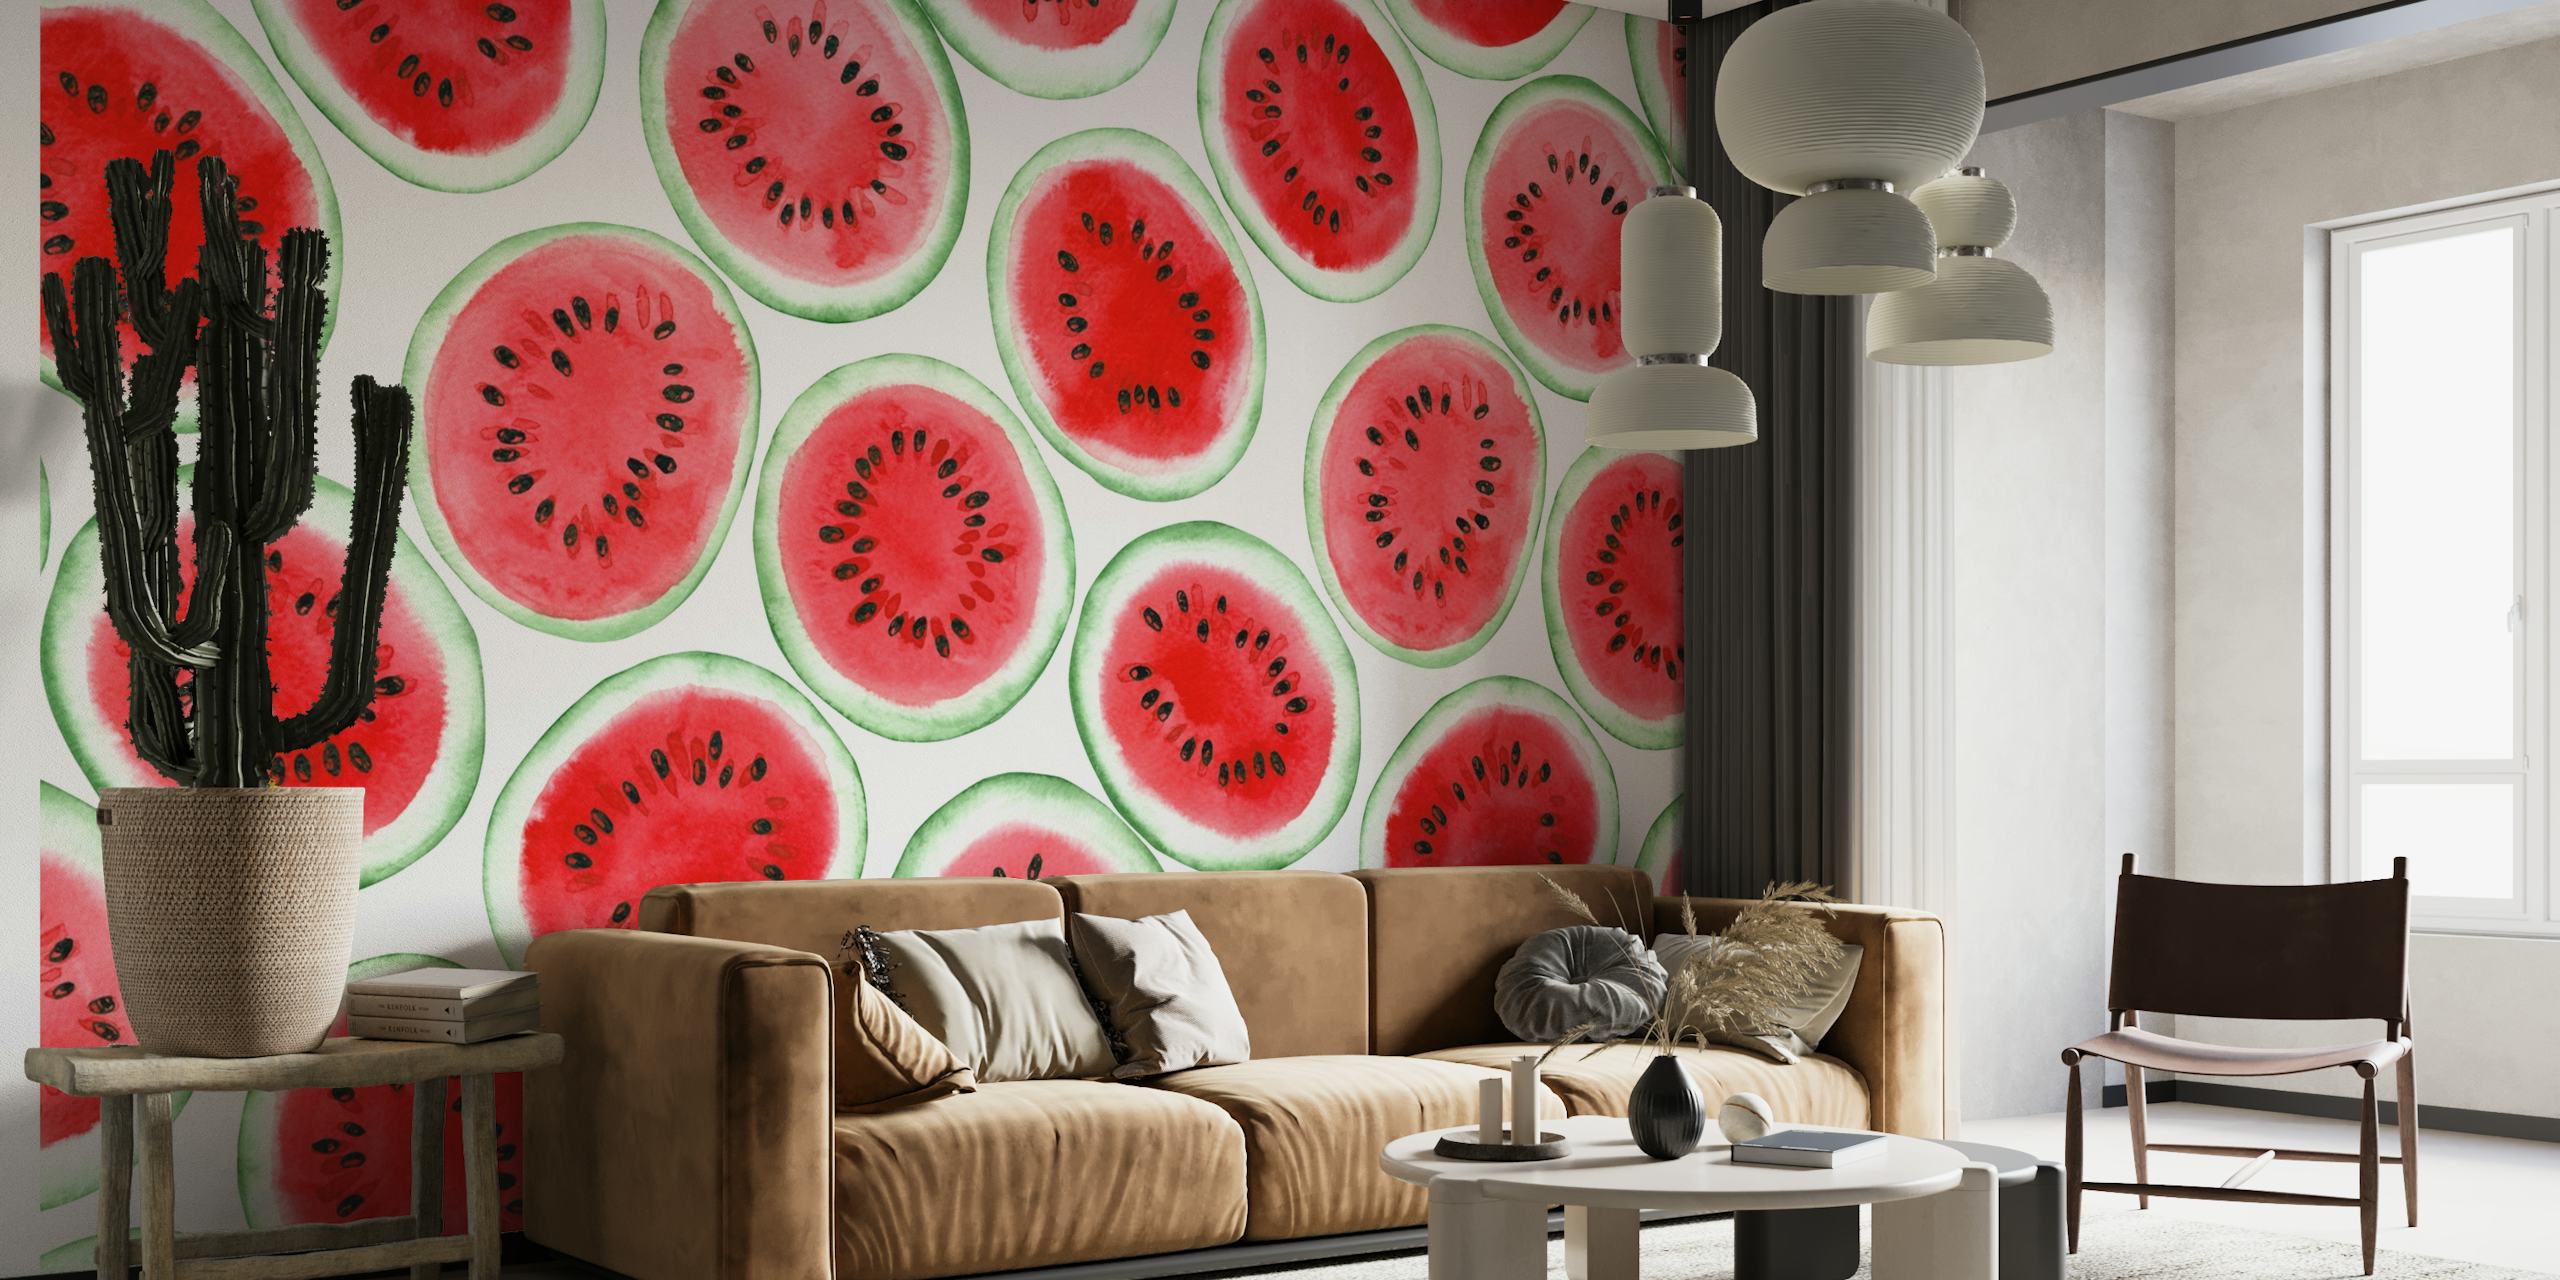 Watermelon slices 4 behang